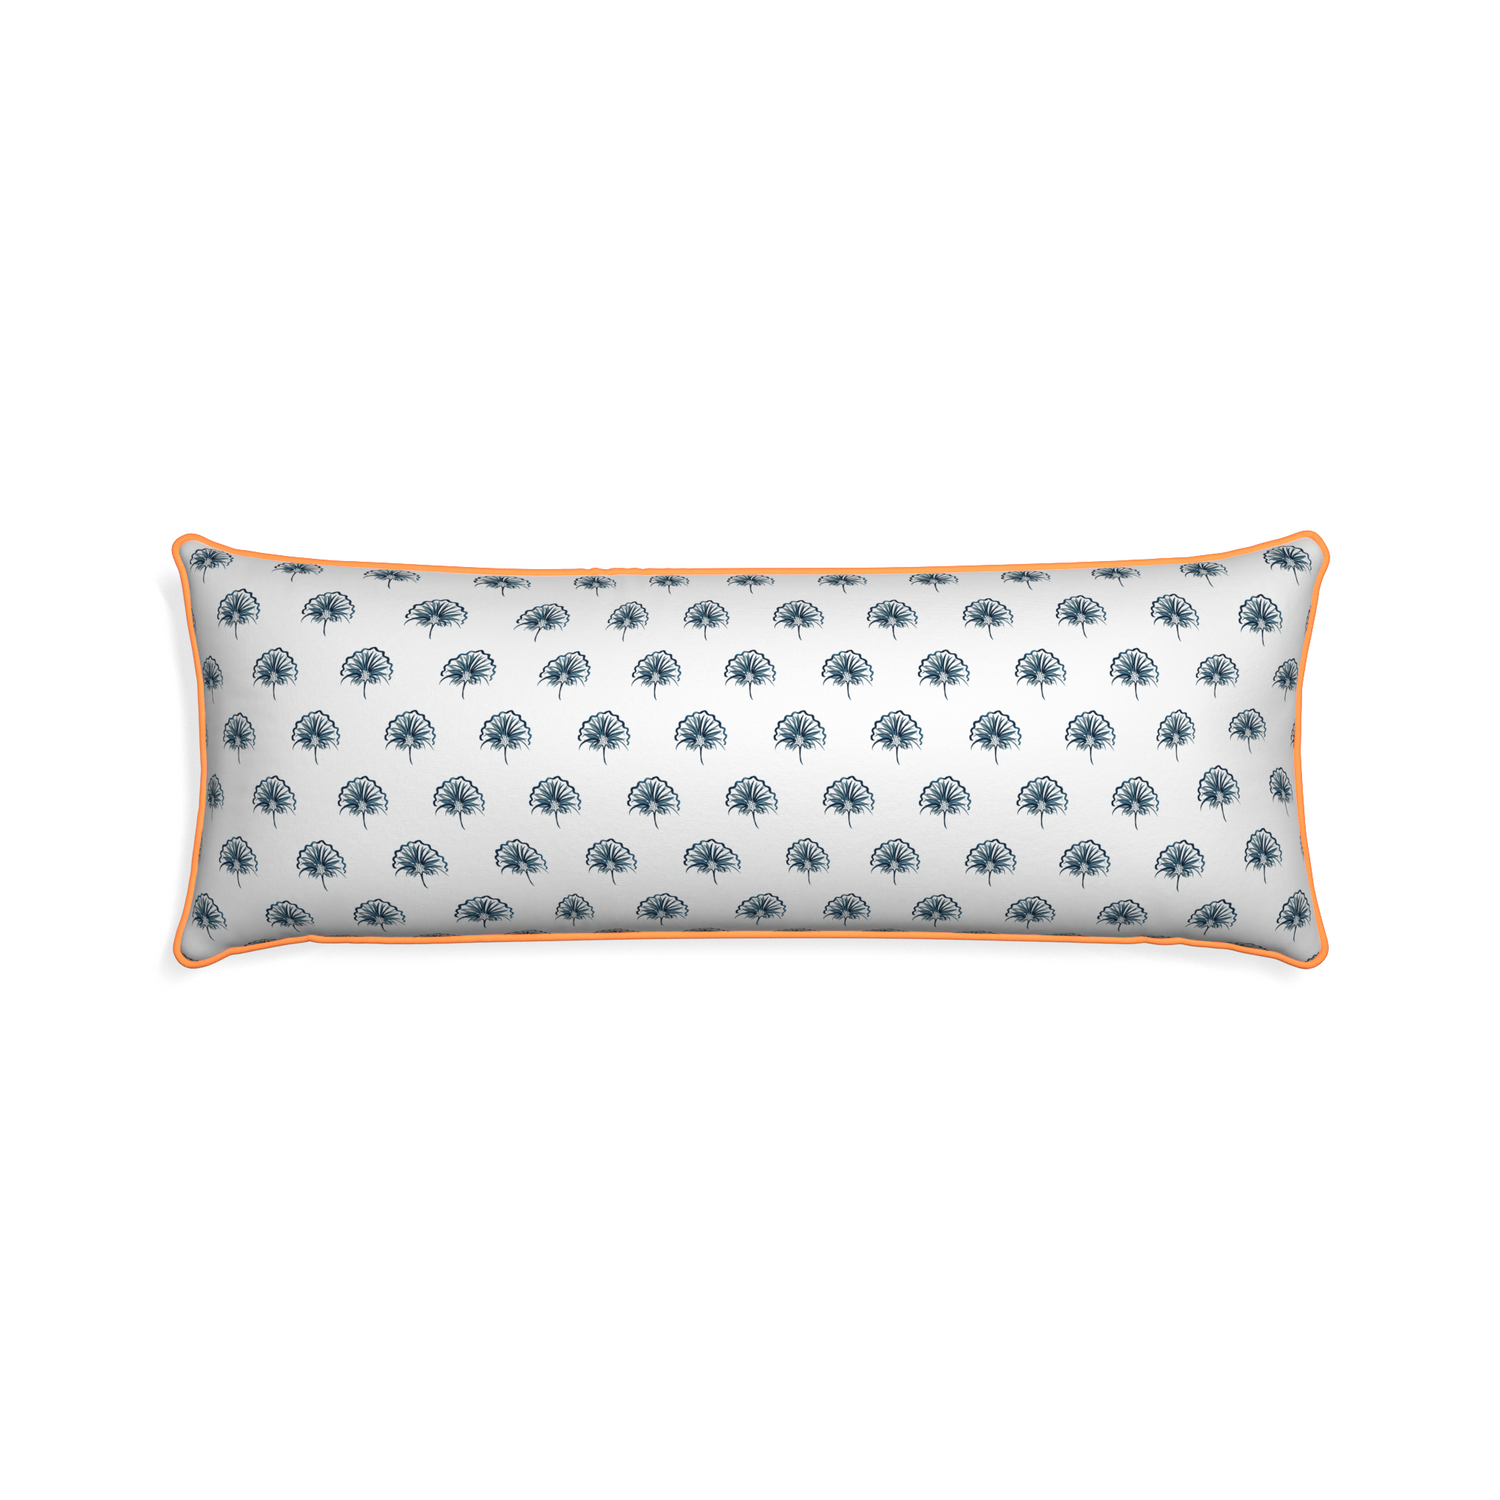 Xl-lumbar penelope midnight custom pillow with clementine piping on white background